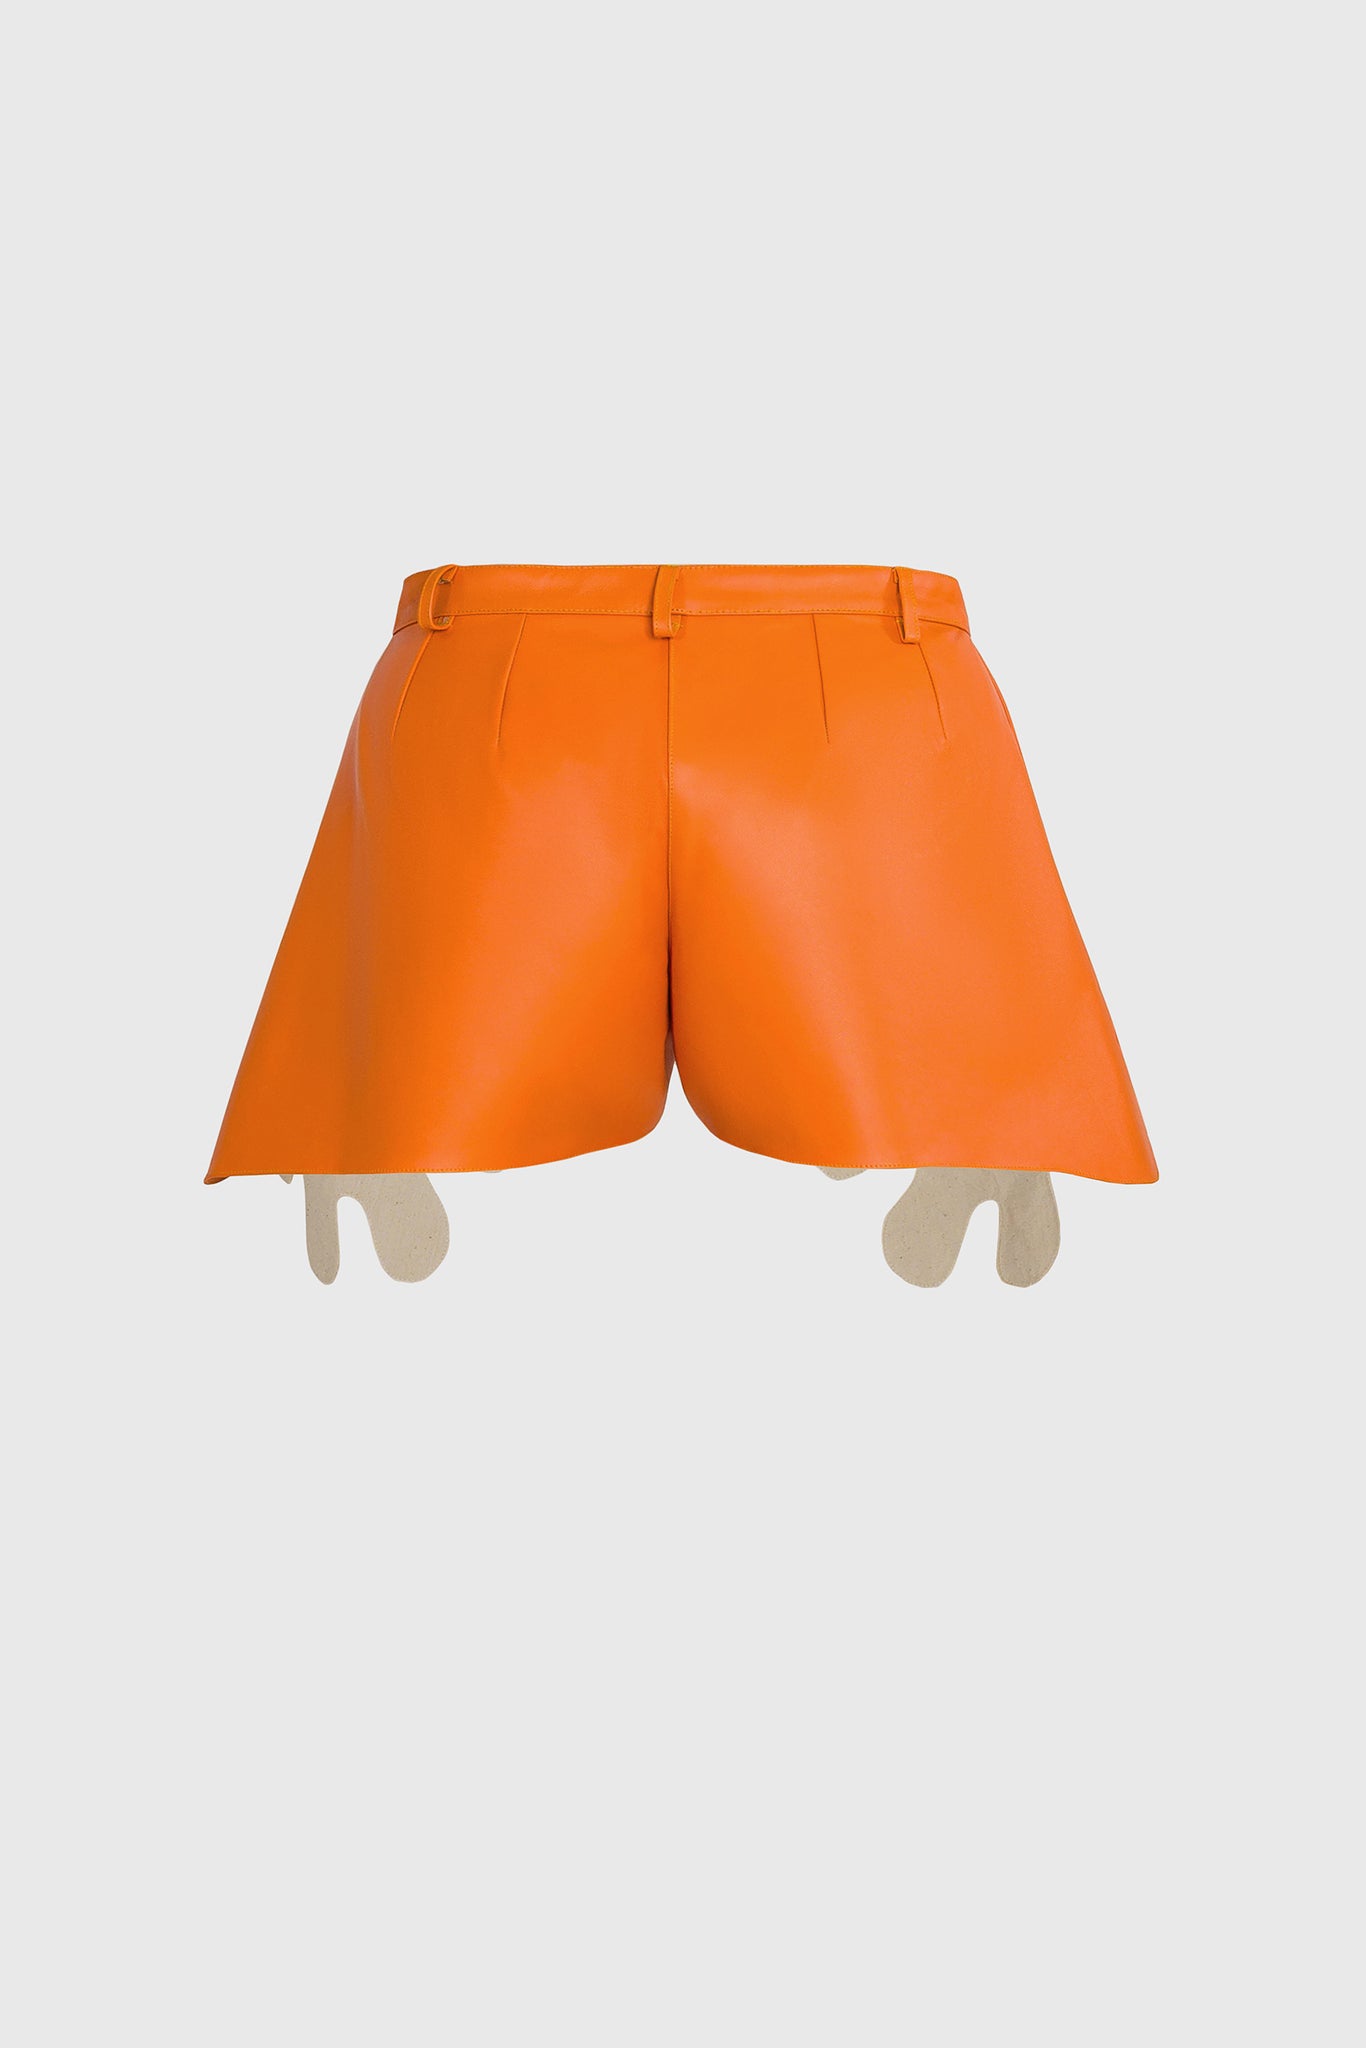 playful super short shorts, Italian soft leather, football style shorts, with belt loops, ready to party, easy to wear and comfortable, Ibiza style orange shorts